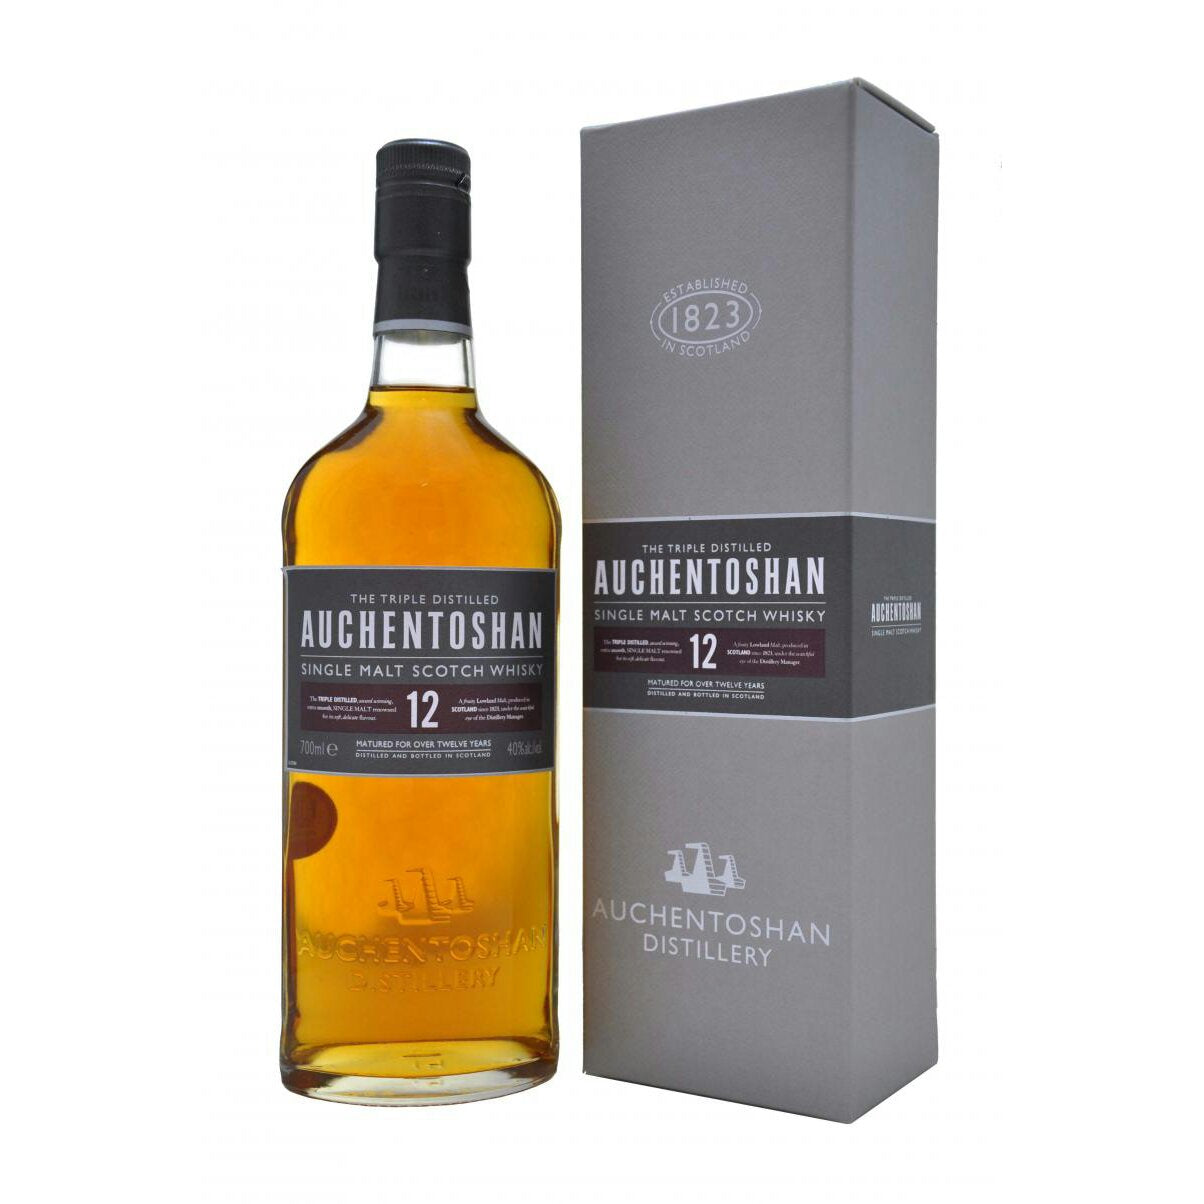 Auchentoshan The Single 12 Scotch Whisky – Malt Old Guild Years Collective